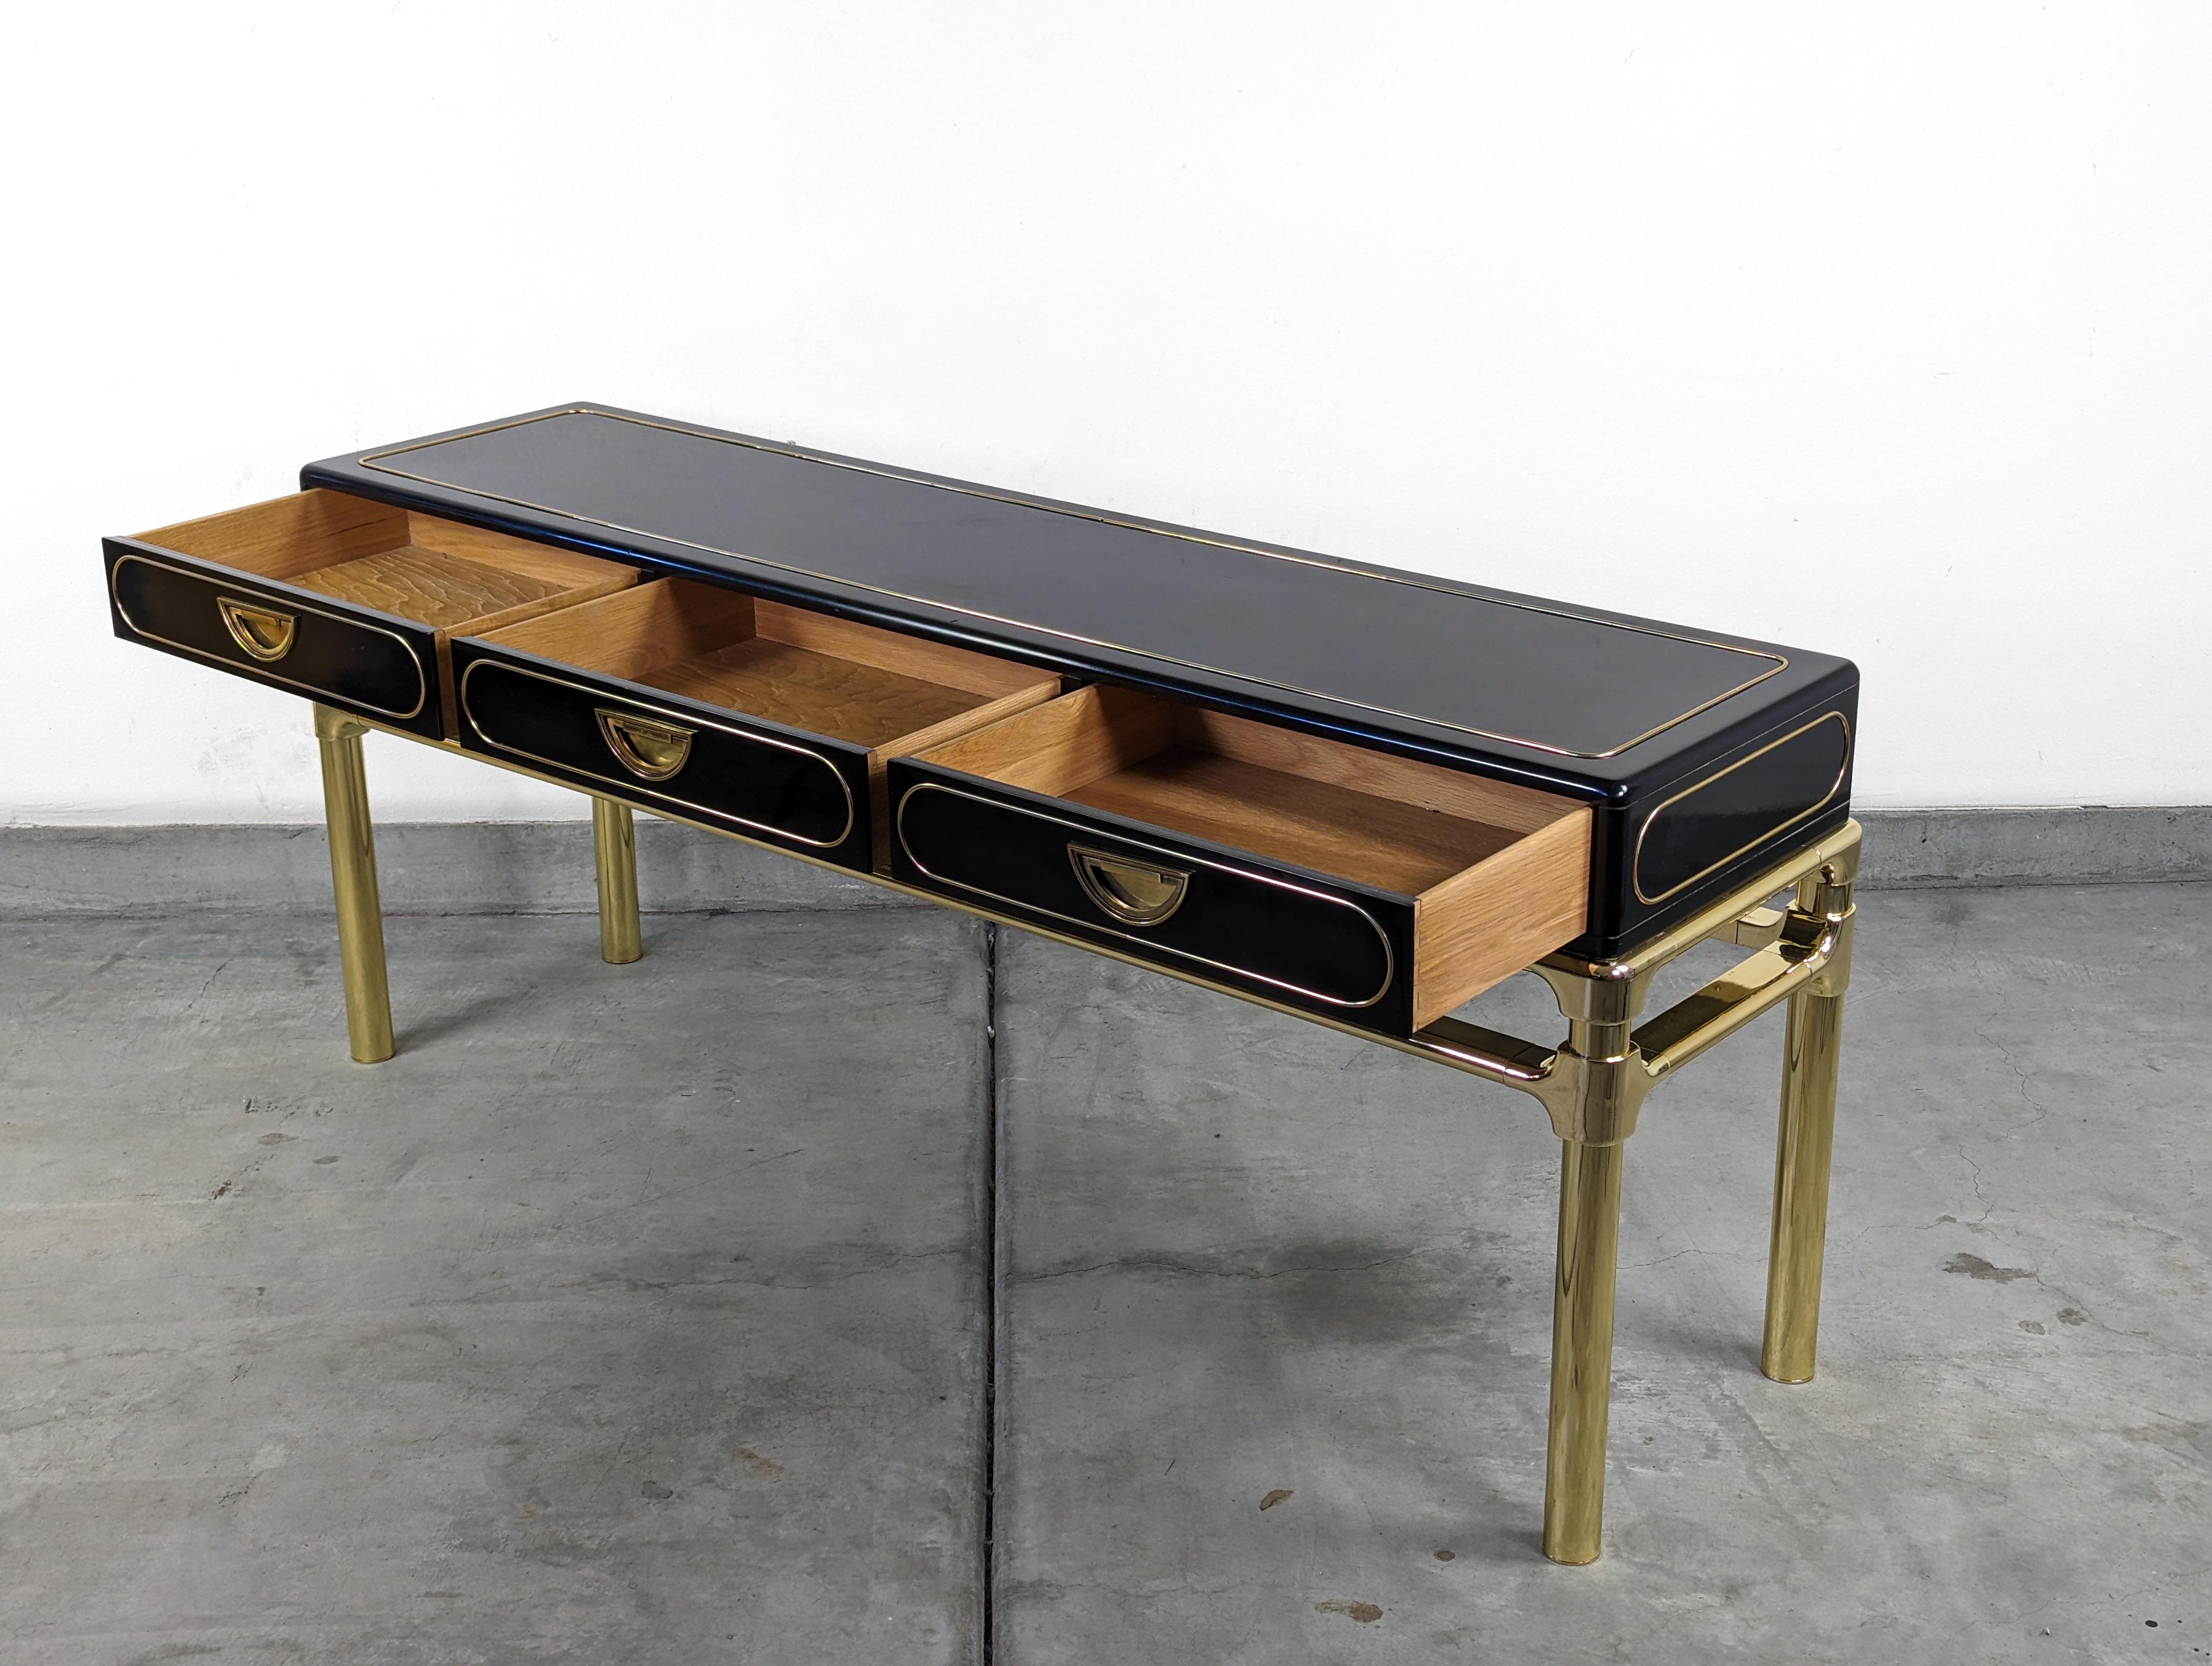 Brass and Black Lacquer Console Table With Drawers by Mastercraft, c1970s For Sale 1